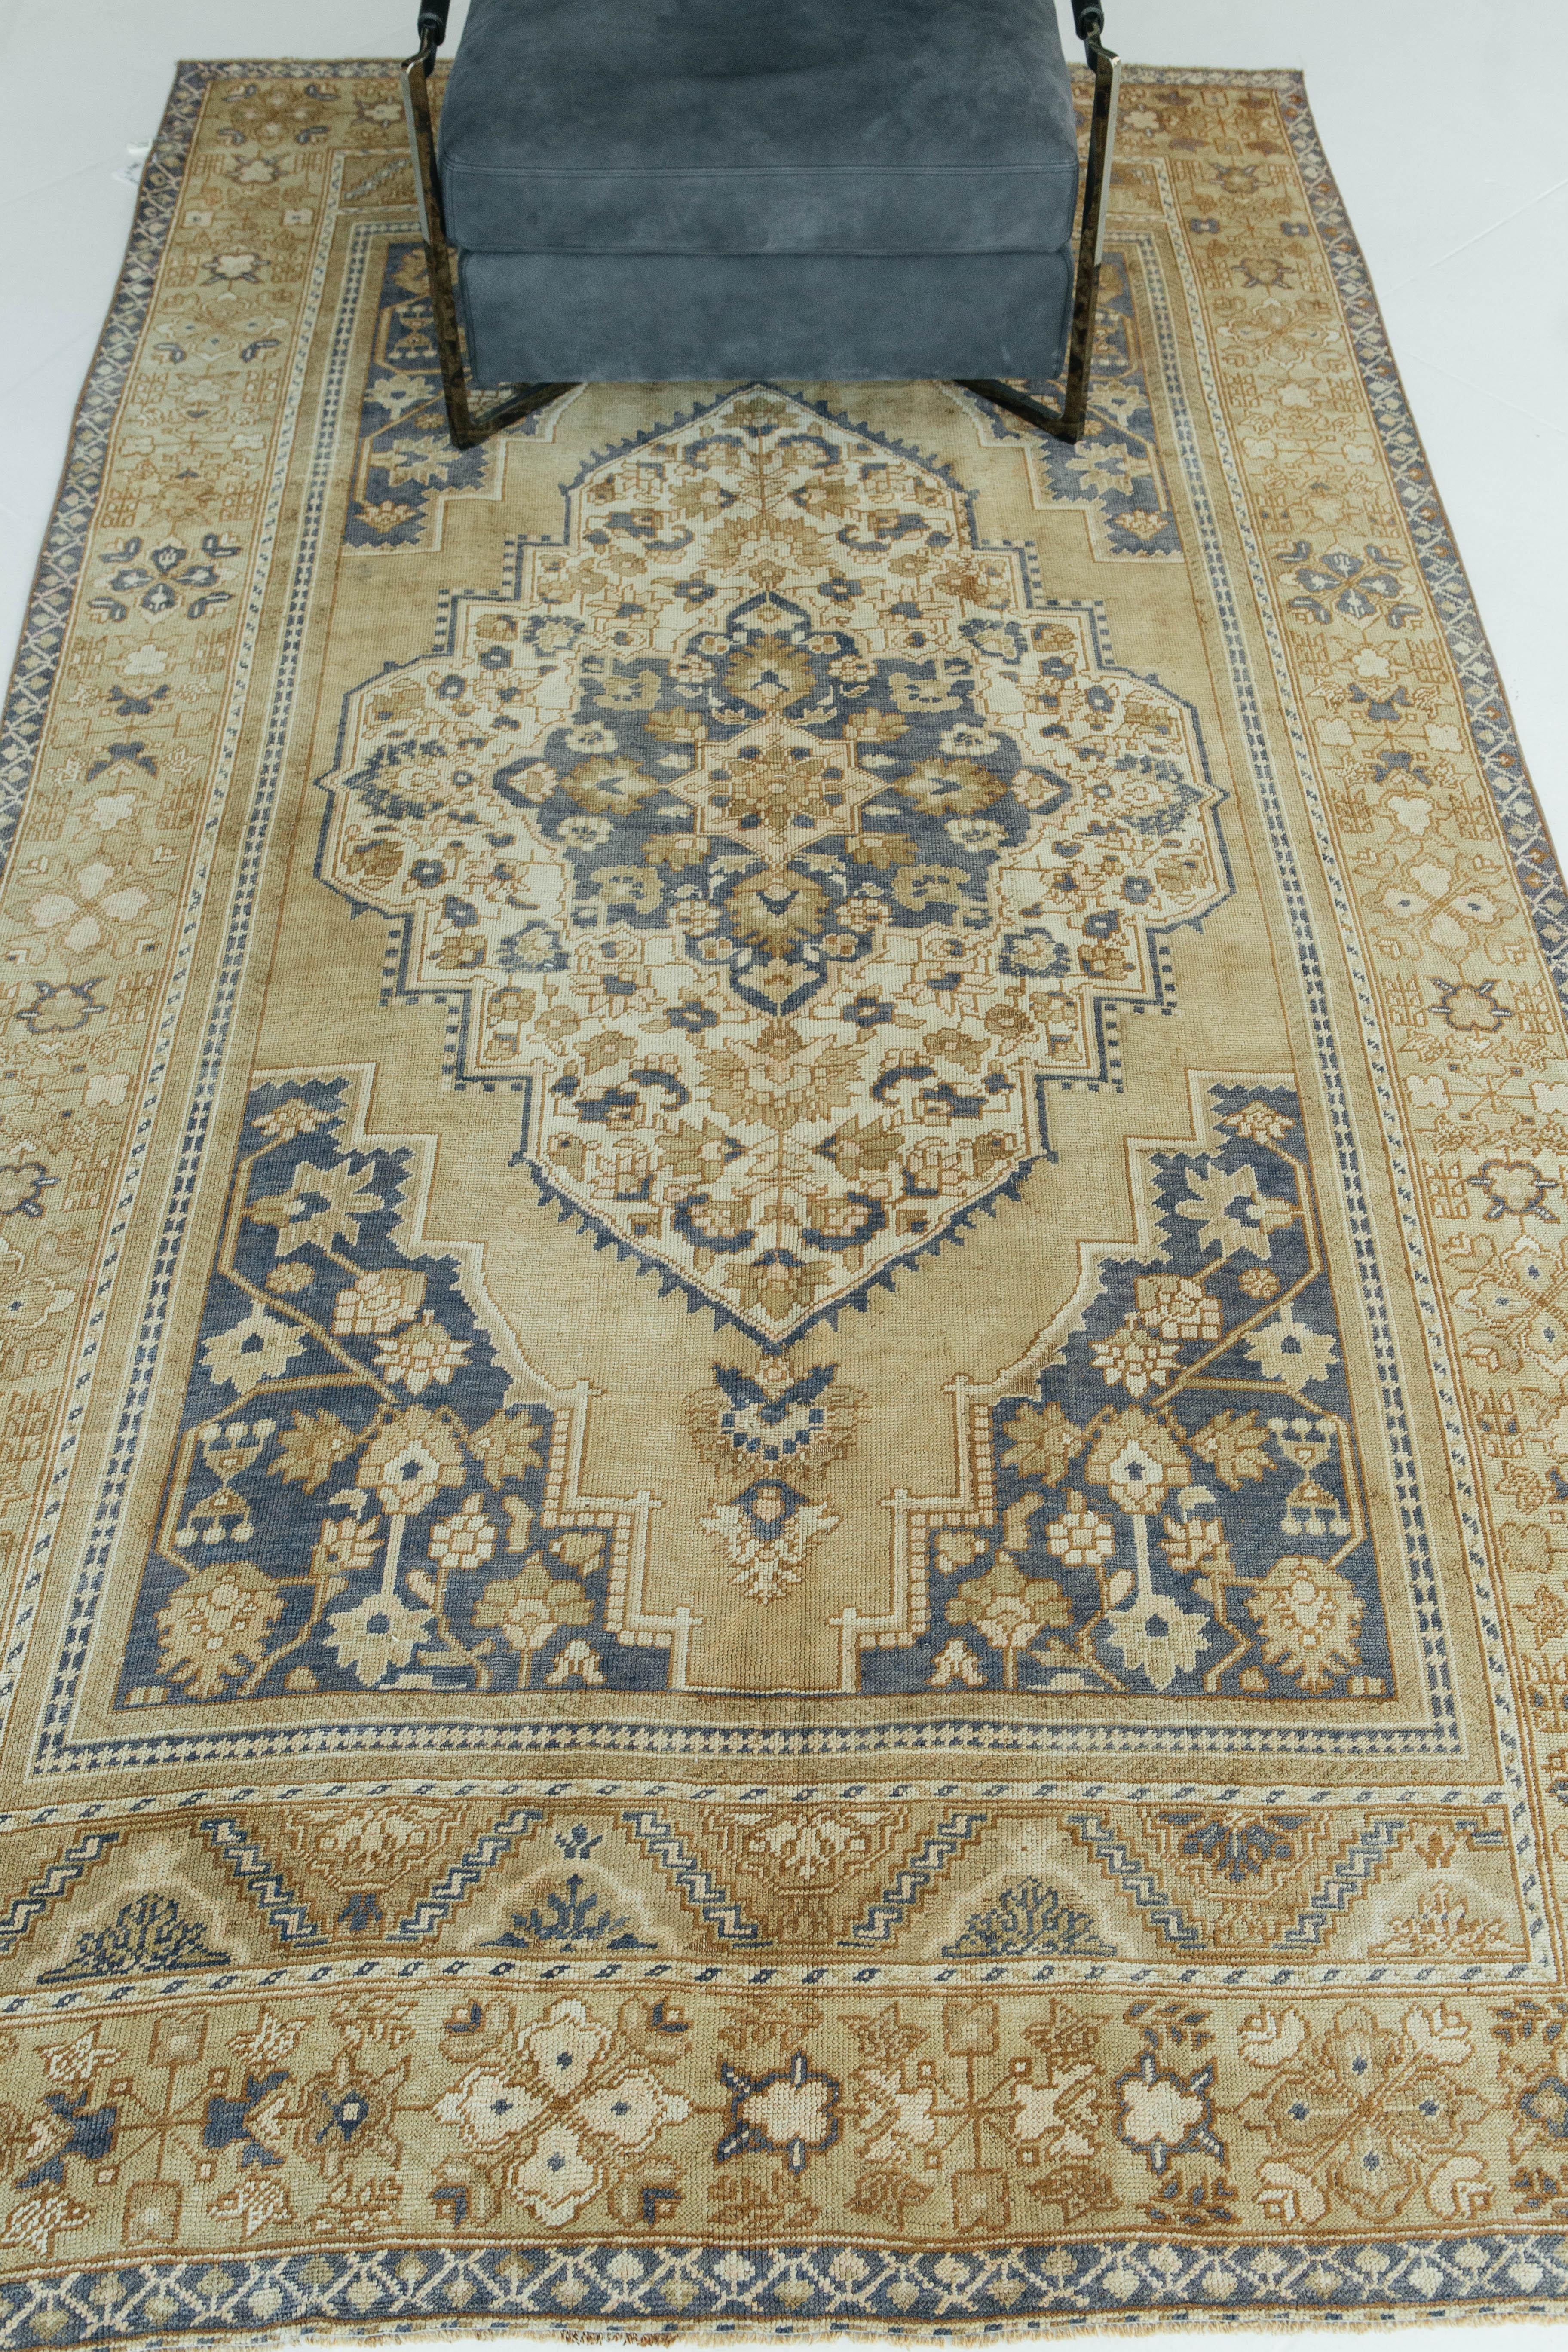 Vintage Turkish Anatolian rugs weave together dyes and colors, motifs, textures and techniques that are popular in Anatolia or Asia Minor. Symmetrical knots are also true components of Anatolian rugs alongside the diamond and floral shaped elements